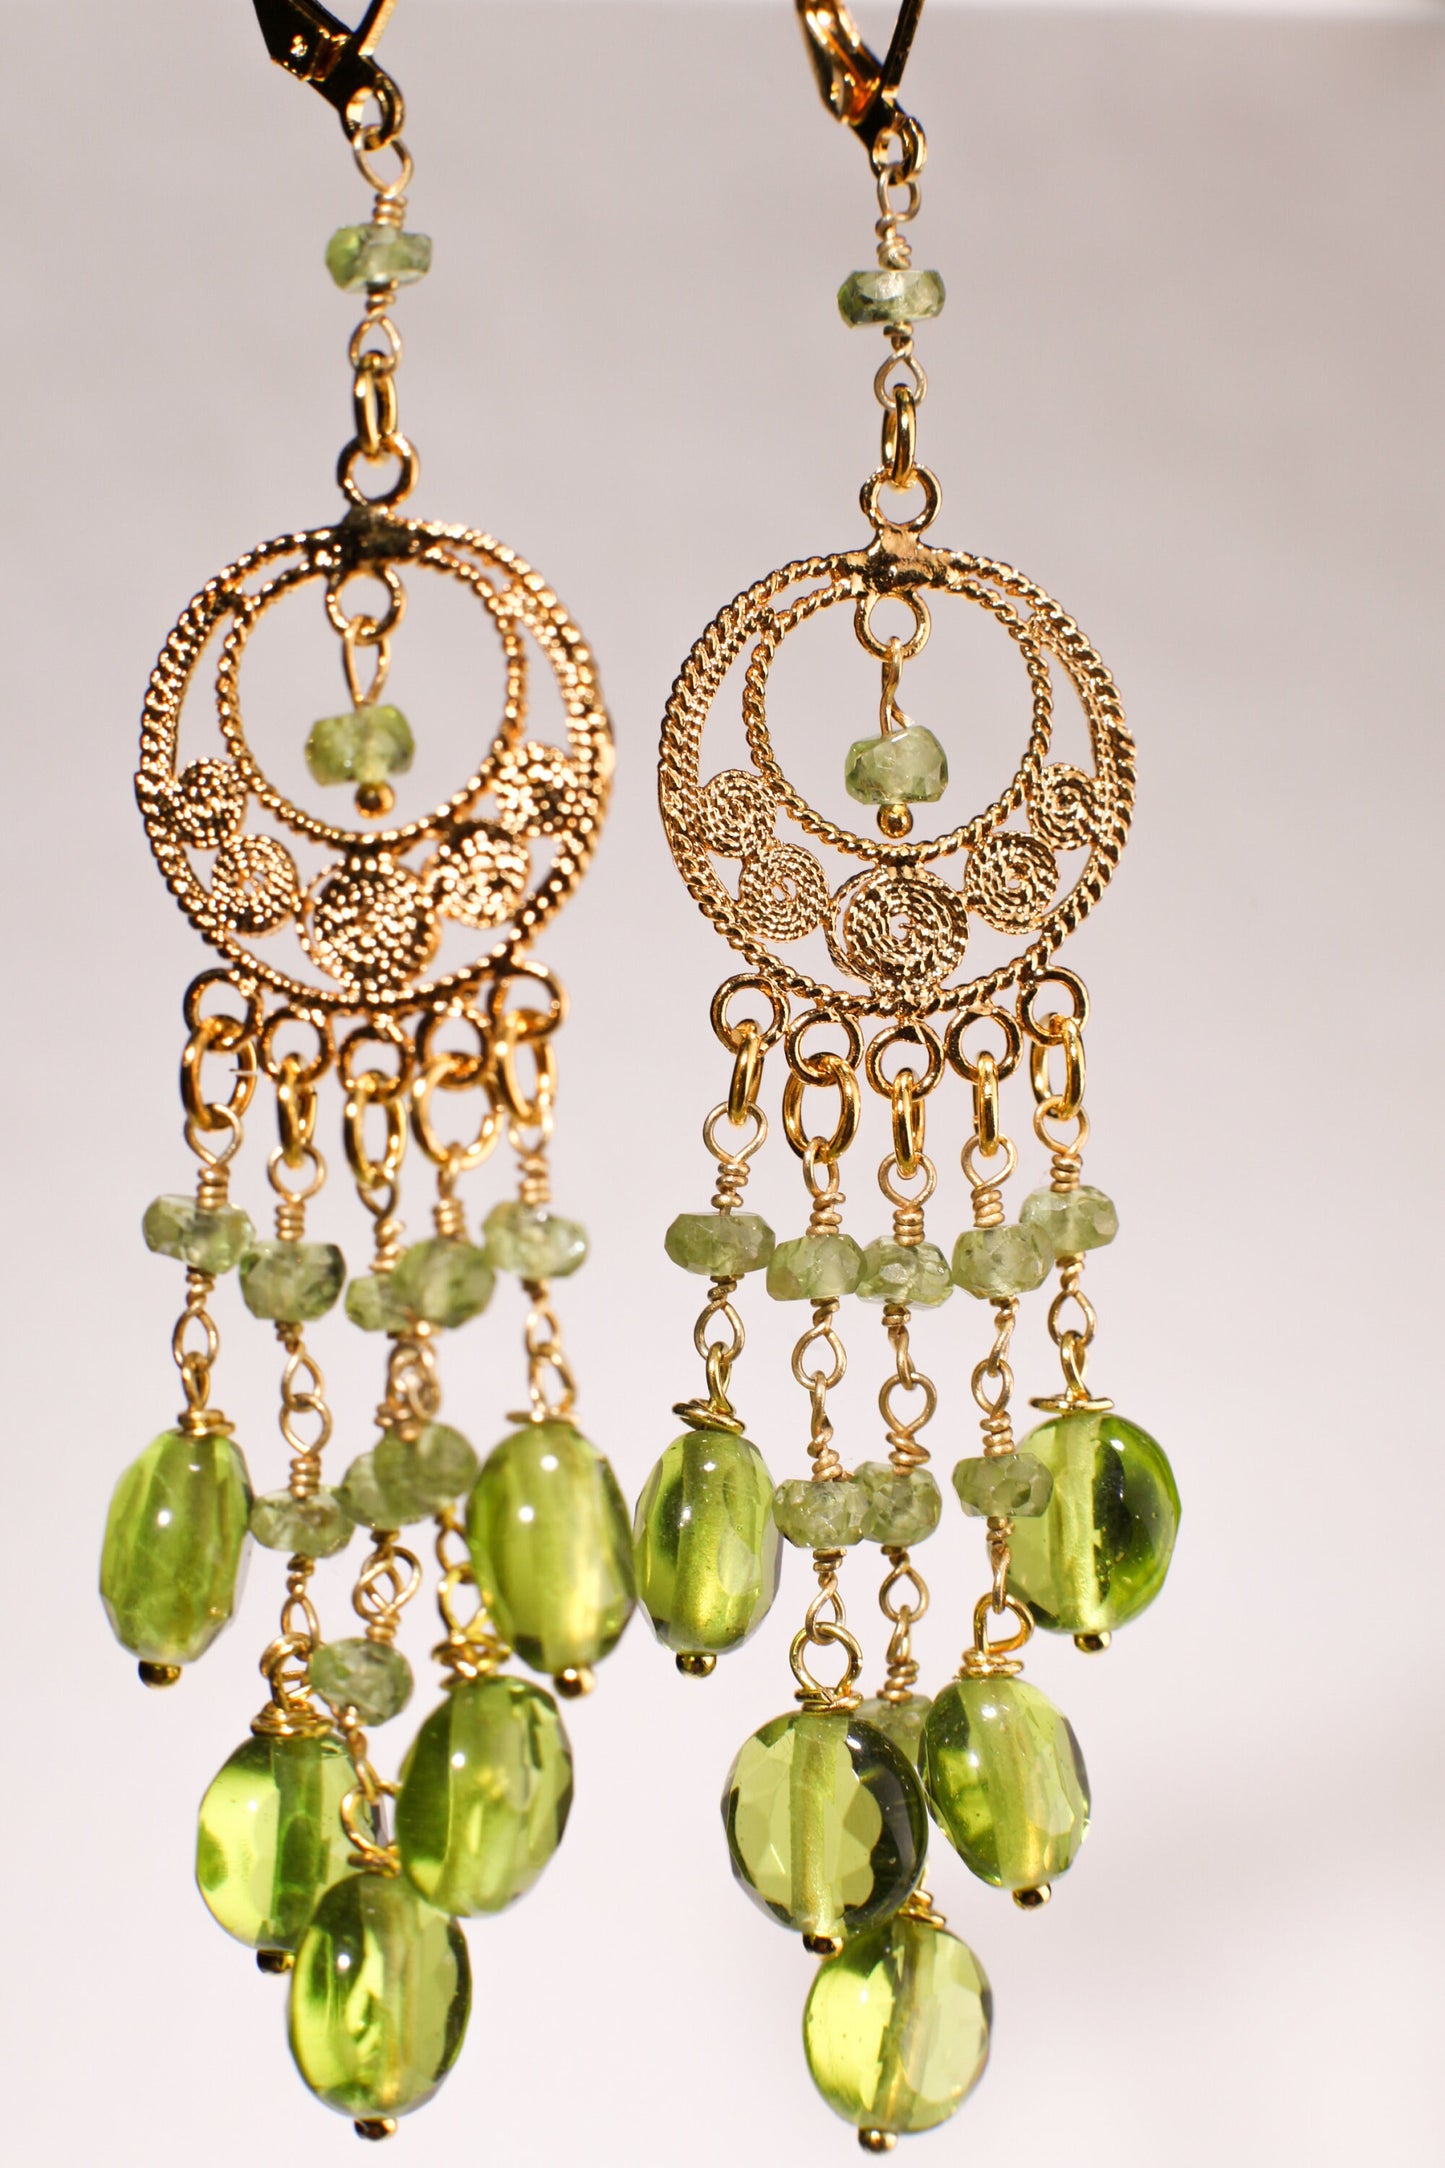 Peridot Wire Wrapped 3mm Rondelle Dangling with 8mm Peridot Quartz Coin, Gold Vermeil Chandelier earring.August Birthstone, Dreamcatcher